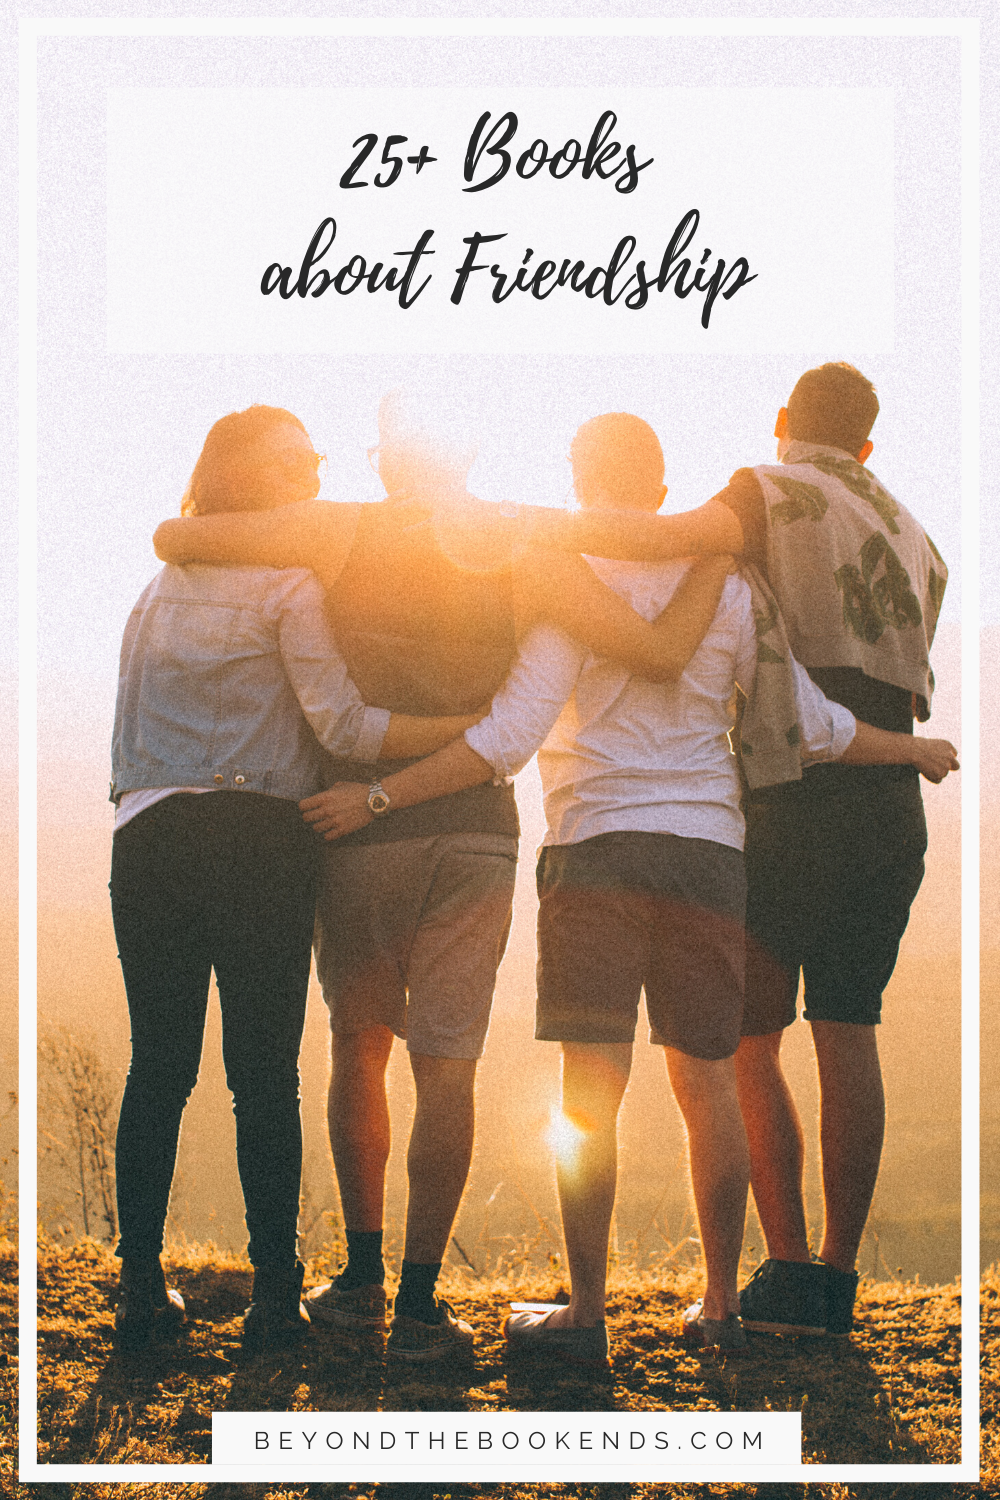 Incredible book releases about friendship. Classics and new books alike, each one would be perfect for your next book club.